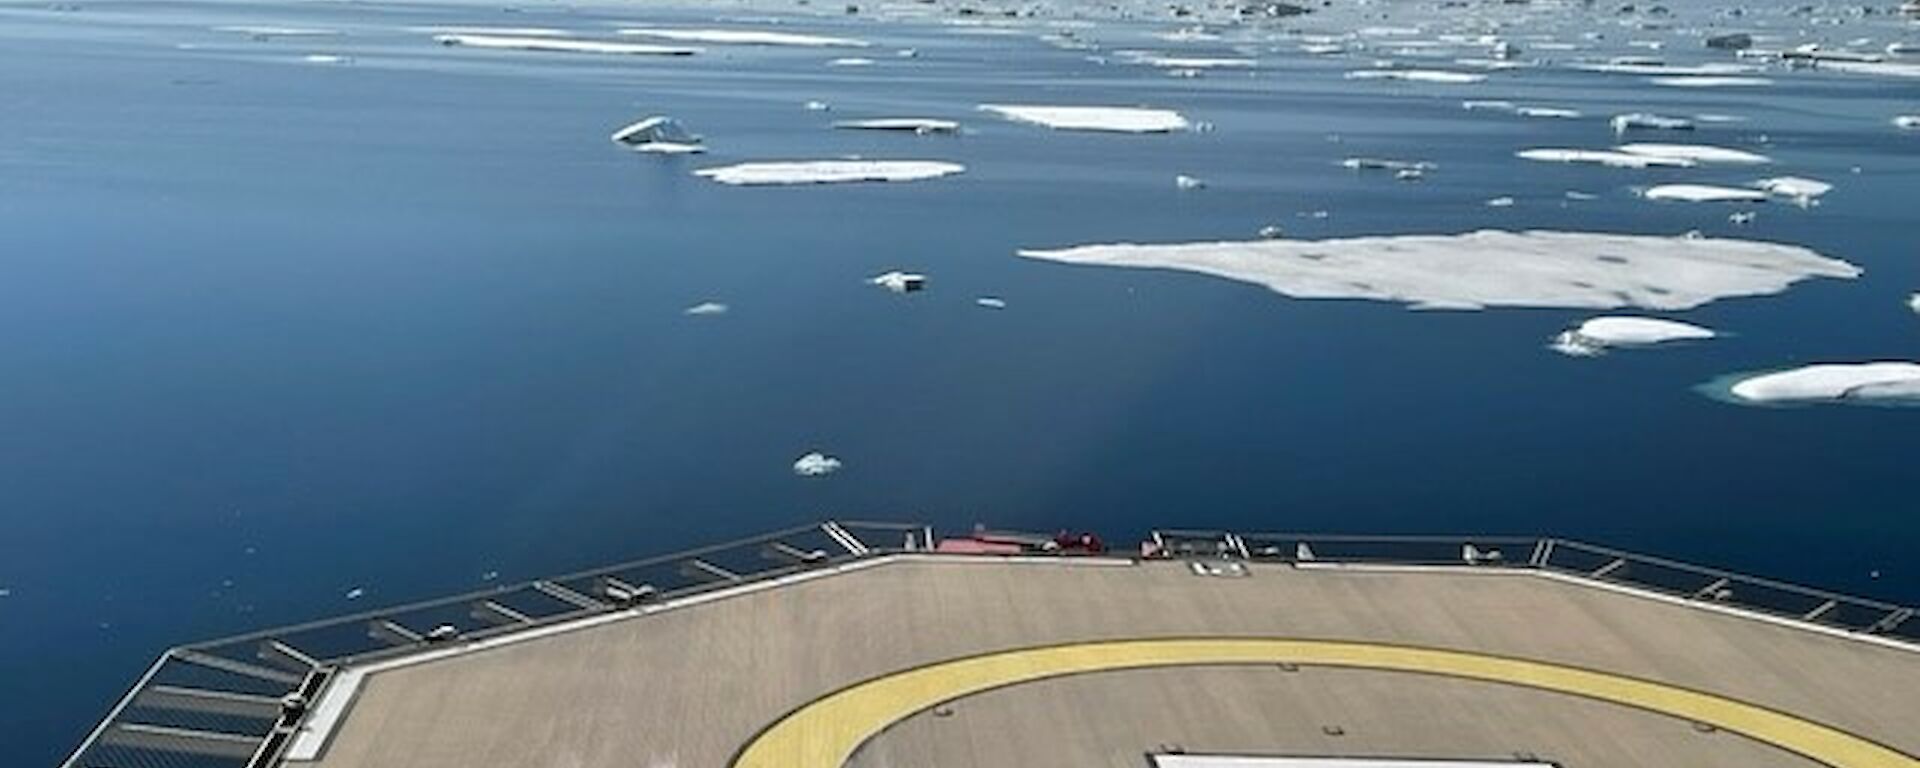 A heli-deck on the back of a ship with icebergs and water in the background